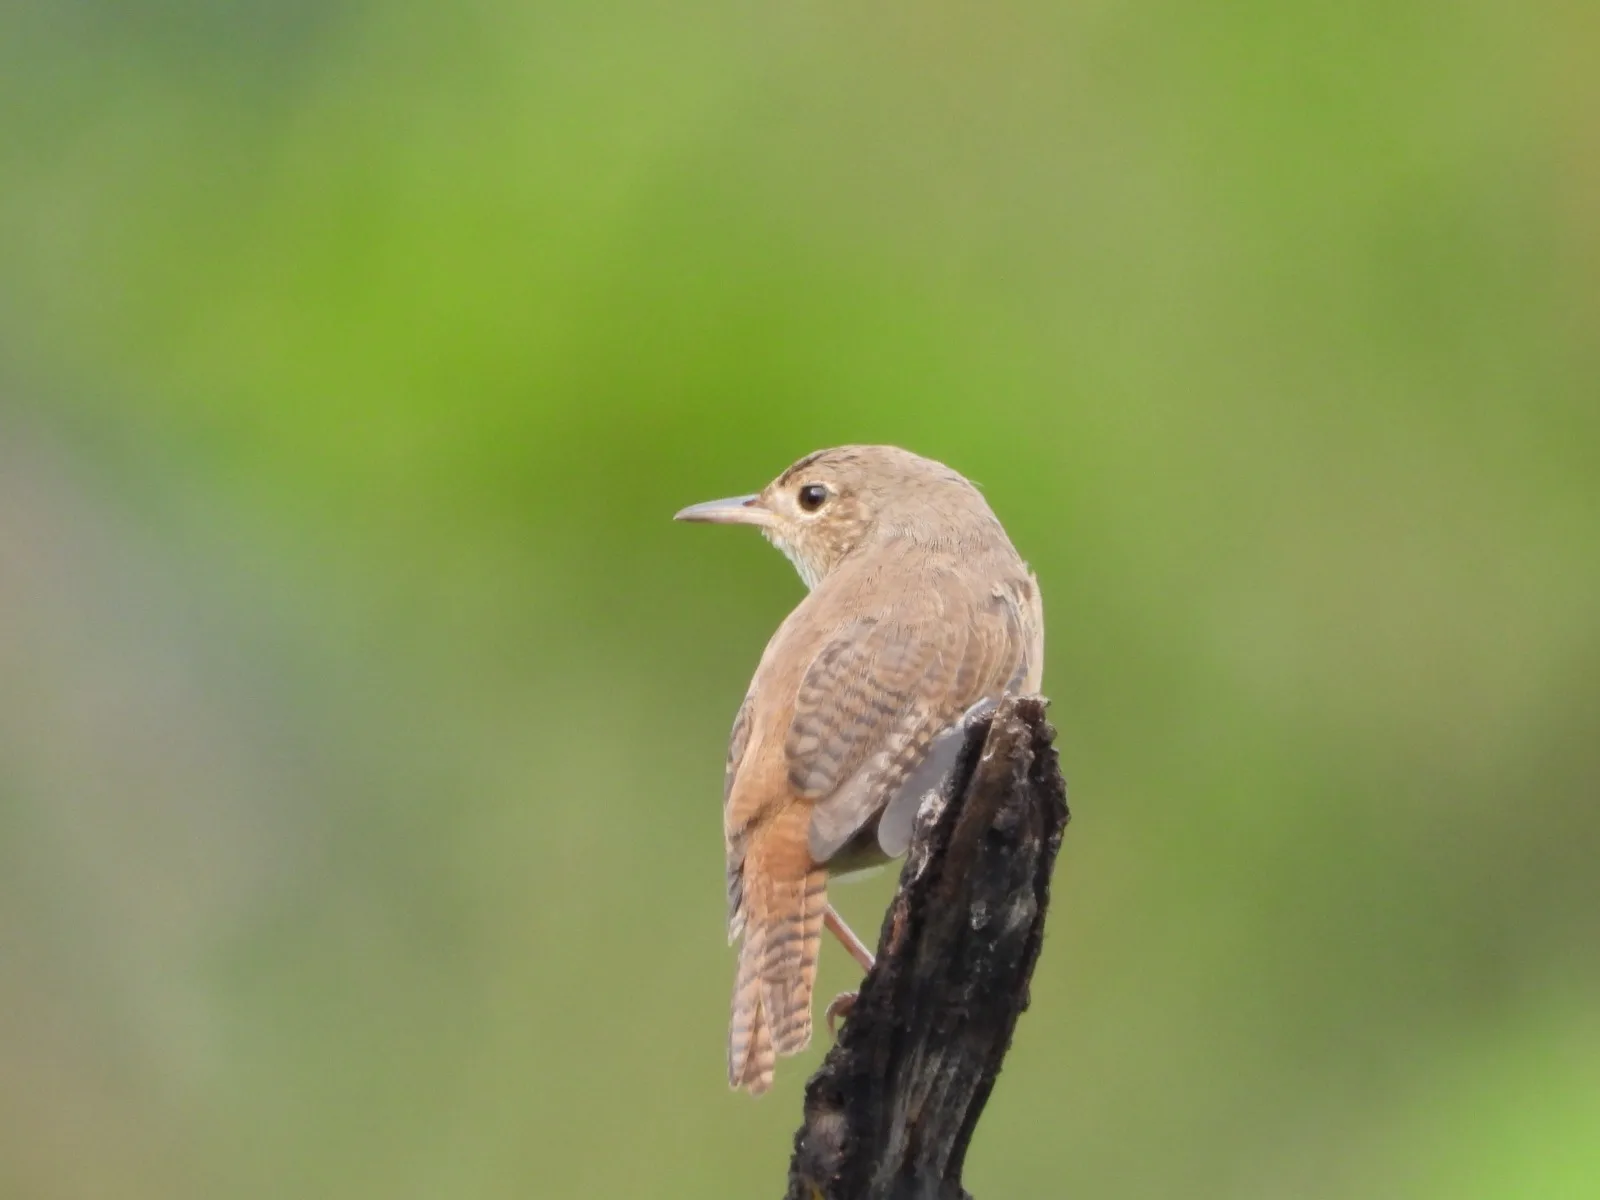 A House Wren sitting on the end of a broken tree branch.